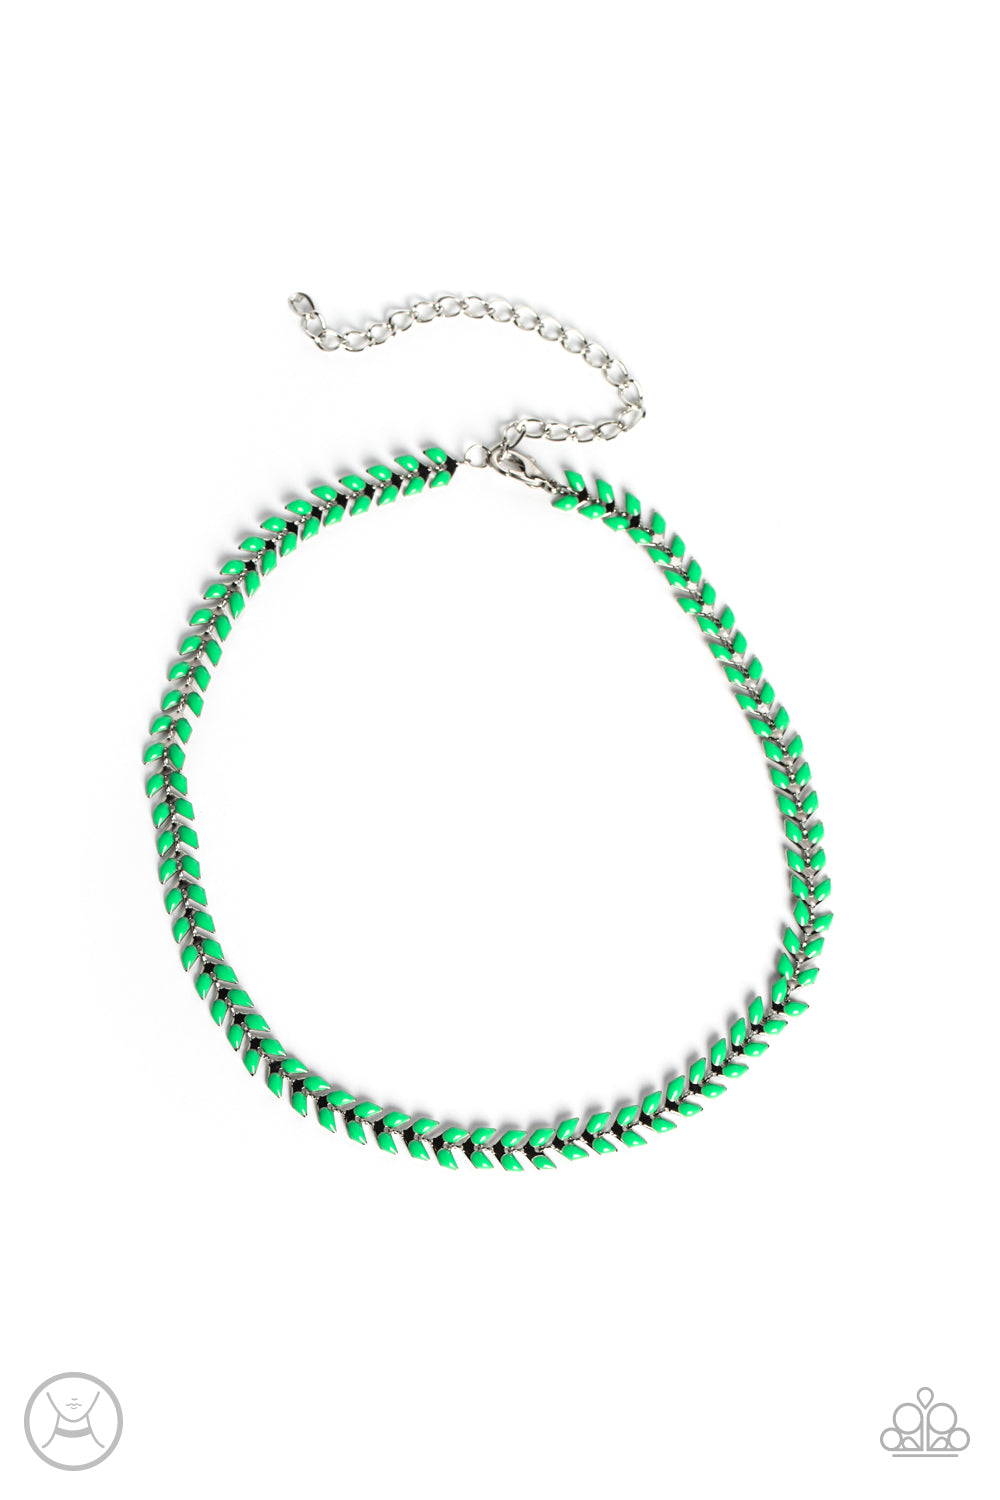 Grecian Grace Green Choker Necklace - Paparazzi Accessories  Fierce Classic Green beads curve into dauntless v-shaped silver frames around the collar, mimicking a Grecian wreath for a fashionable finish. Features an adjustable clasp closure.  Sold as one individual choker necklace. Includes one pair of matching earrings.  P2CH-GRXX-021XX